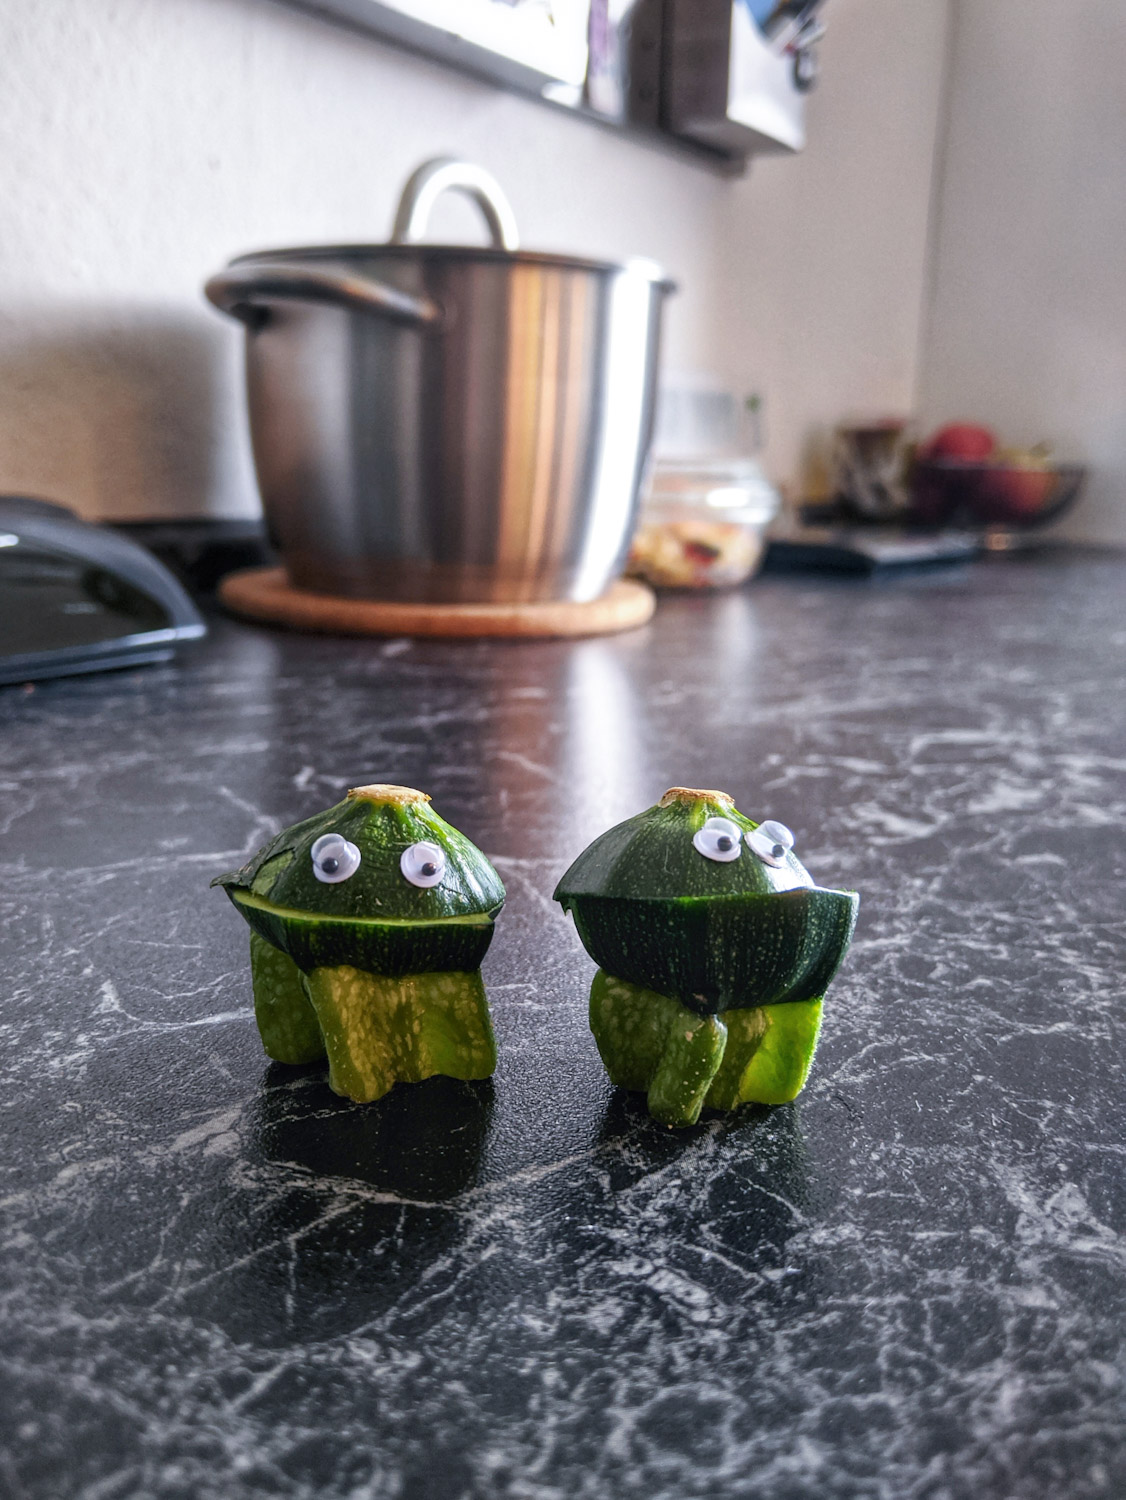 Chini and Gette Zucchini Courgette Googly Eyes @snaepshots by @fraenk